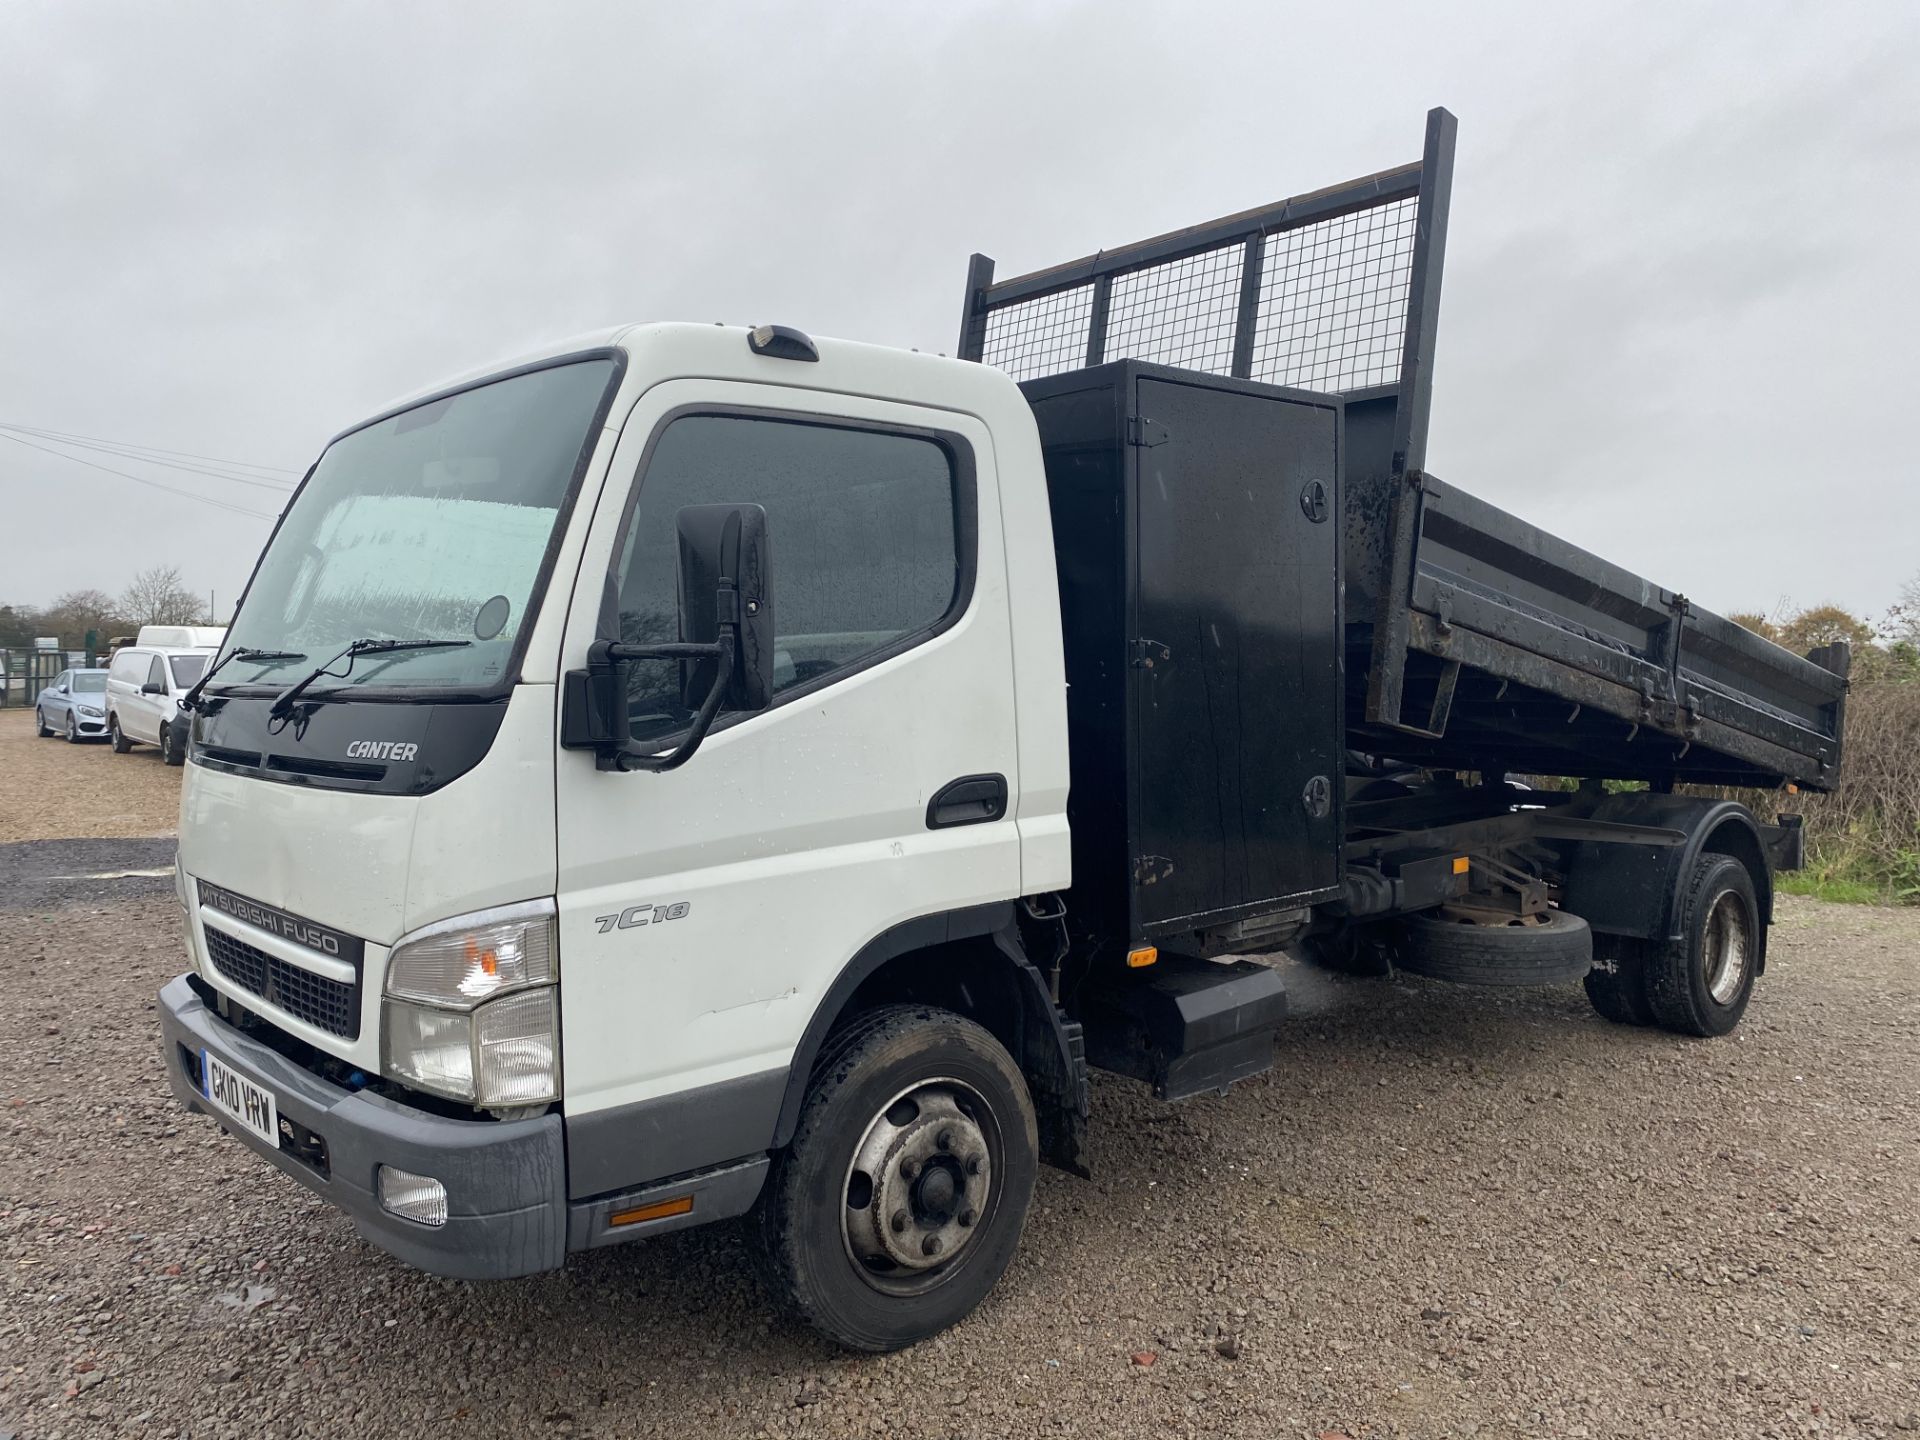 (ON SALE) MITSUBISHI CANTER 7C18 TIPPER TRUCK - 10 REG - 7500KG TIPPER - MANUAL GEARBOX - LOW MILES - Image 4 of 15